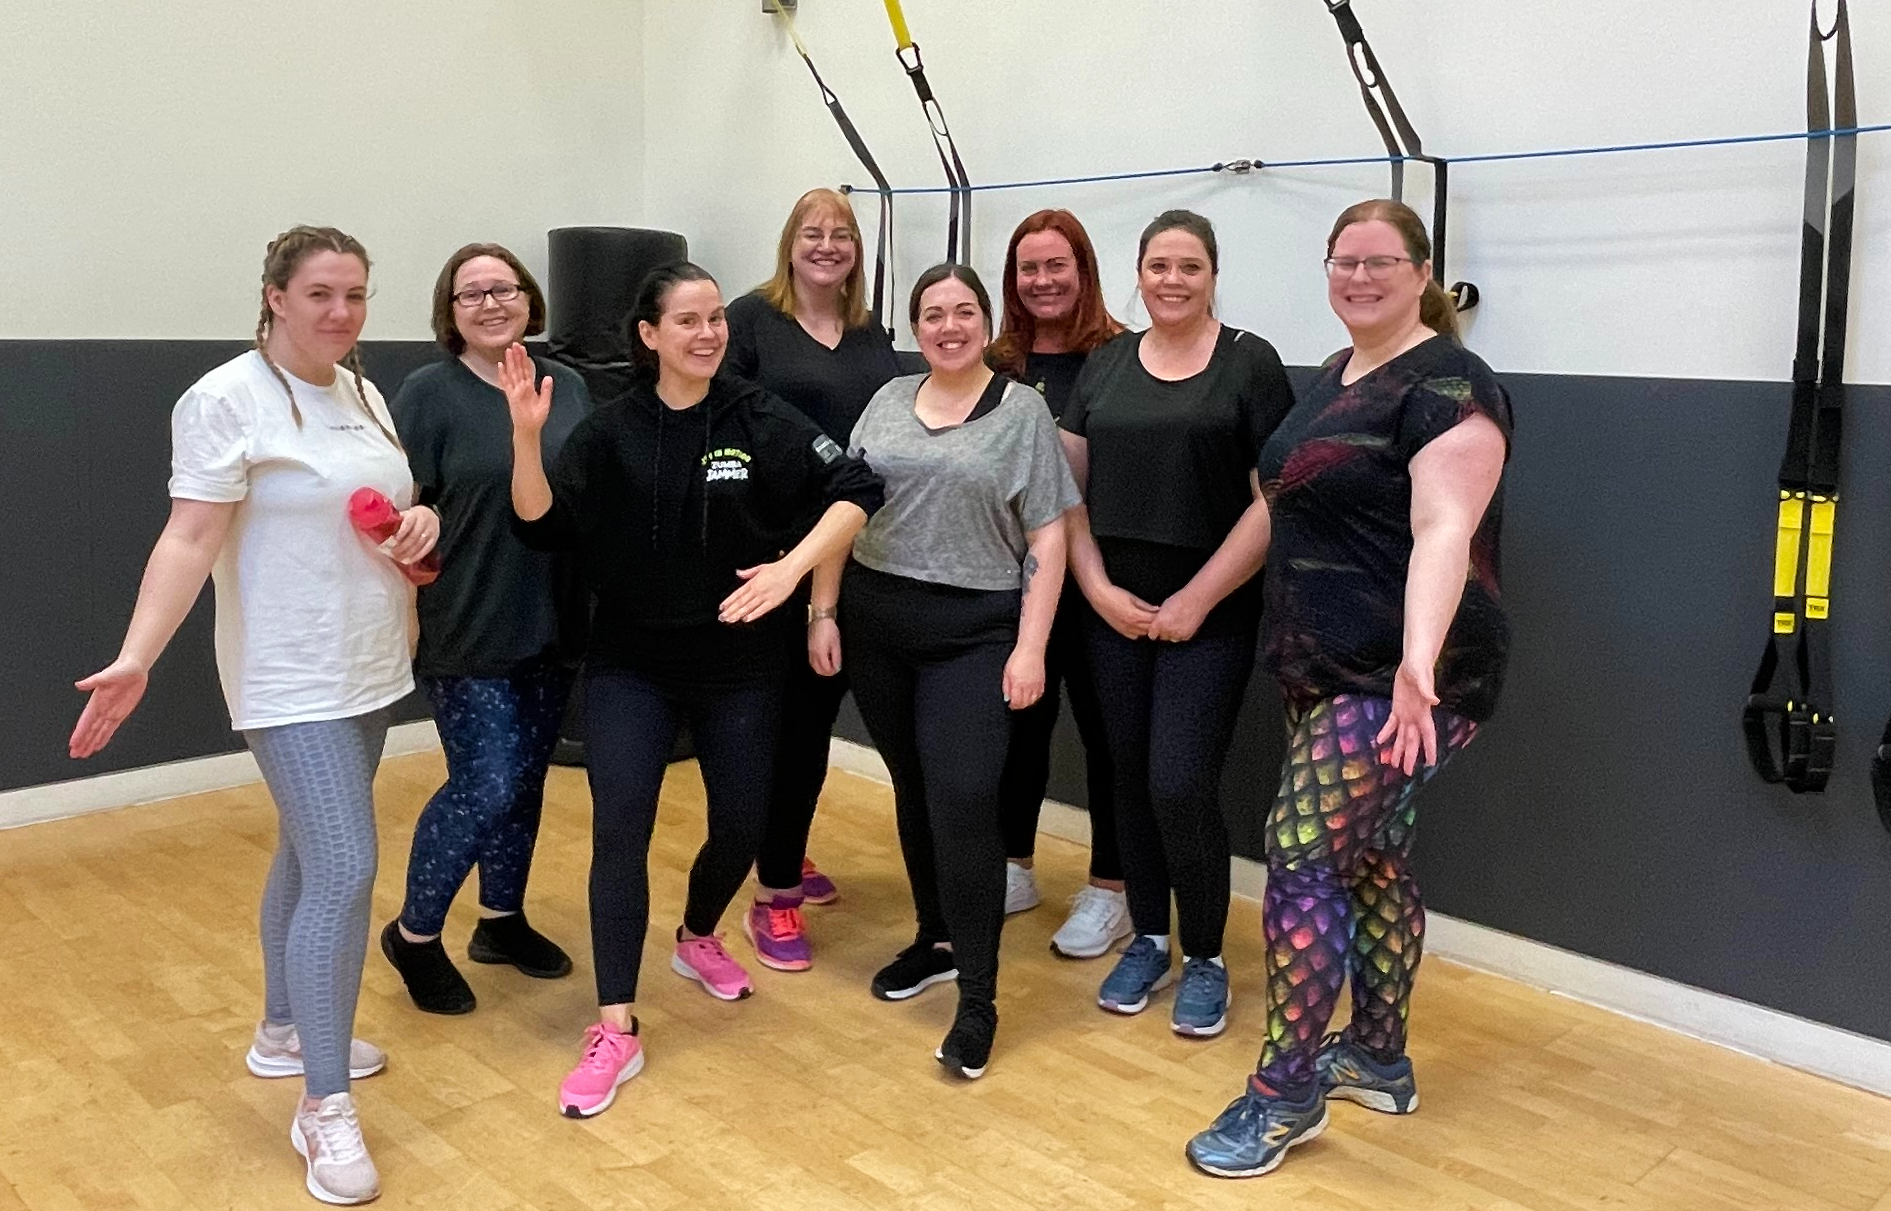 Kingdom Works steps up fitness and fun for jobseekers in Fife